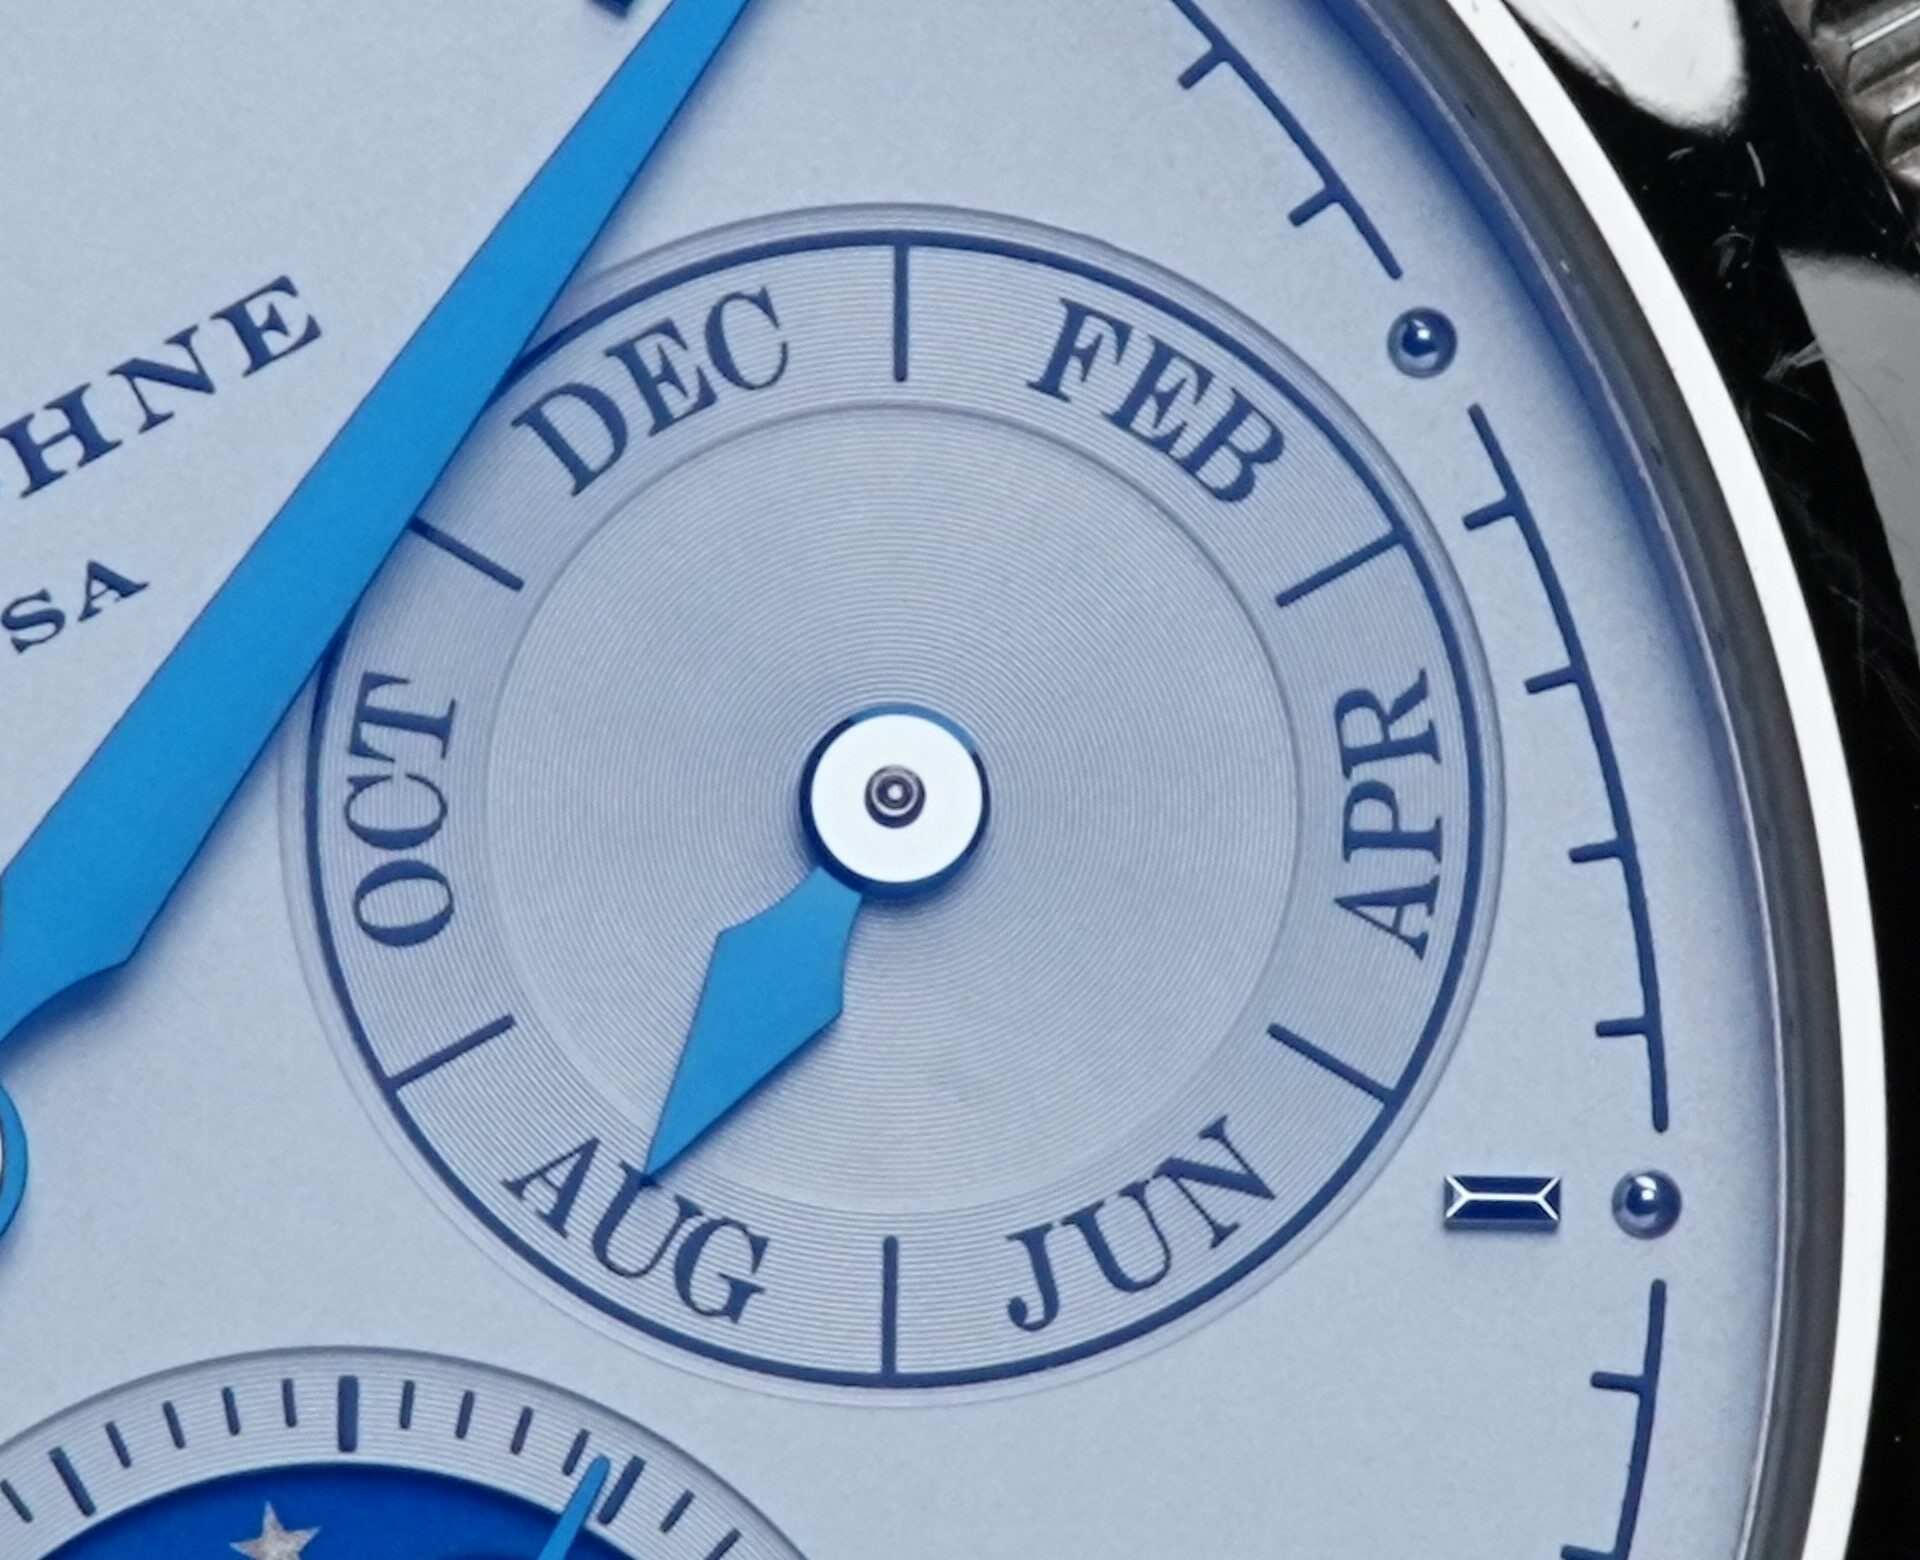 Macro shot of the dial on the A. Lange & Söhne Saxonia Annual Calendar watch.